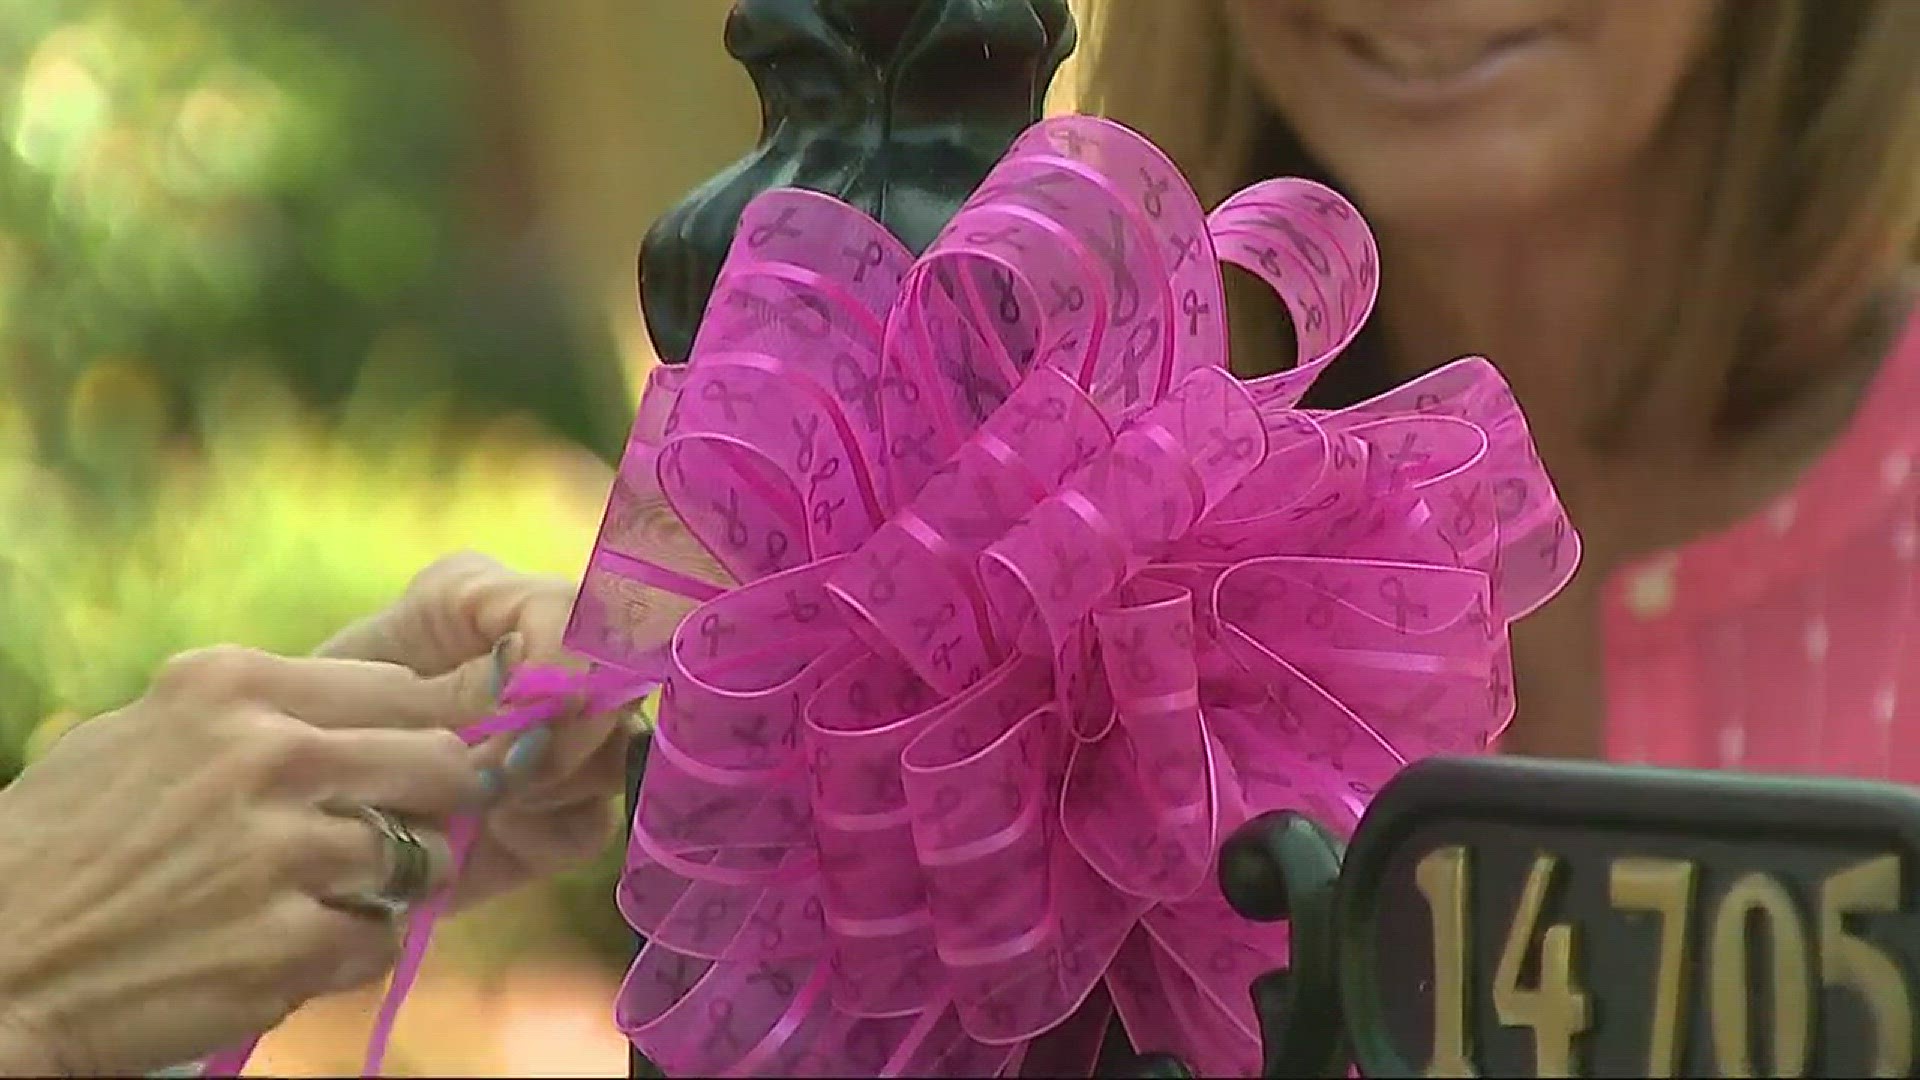 With pink ribbons in hand the Ballantyne Country Club tied 'hope' to their neighbors Friday. October marks the start of Breast Cancer Awareness Month.